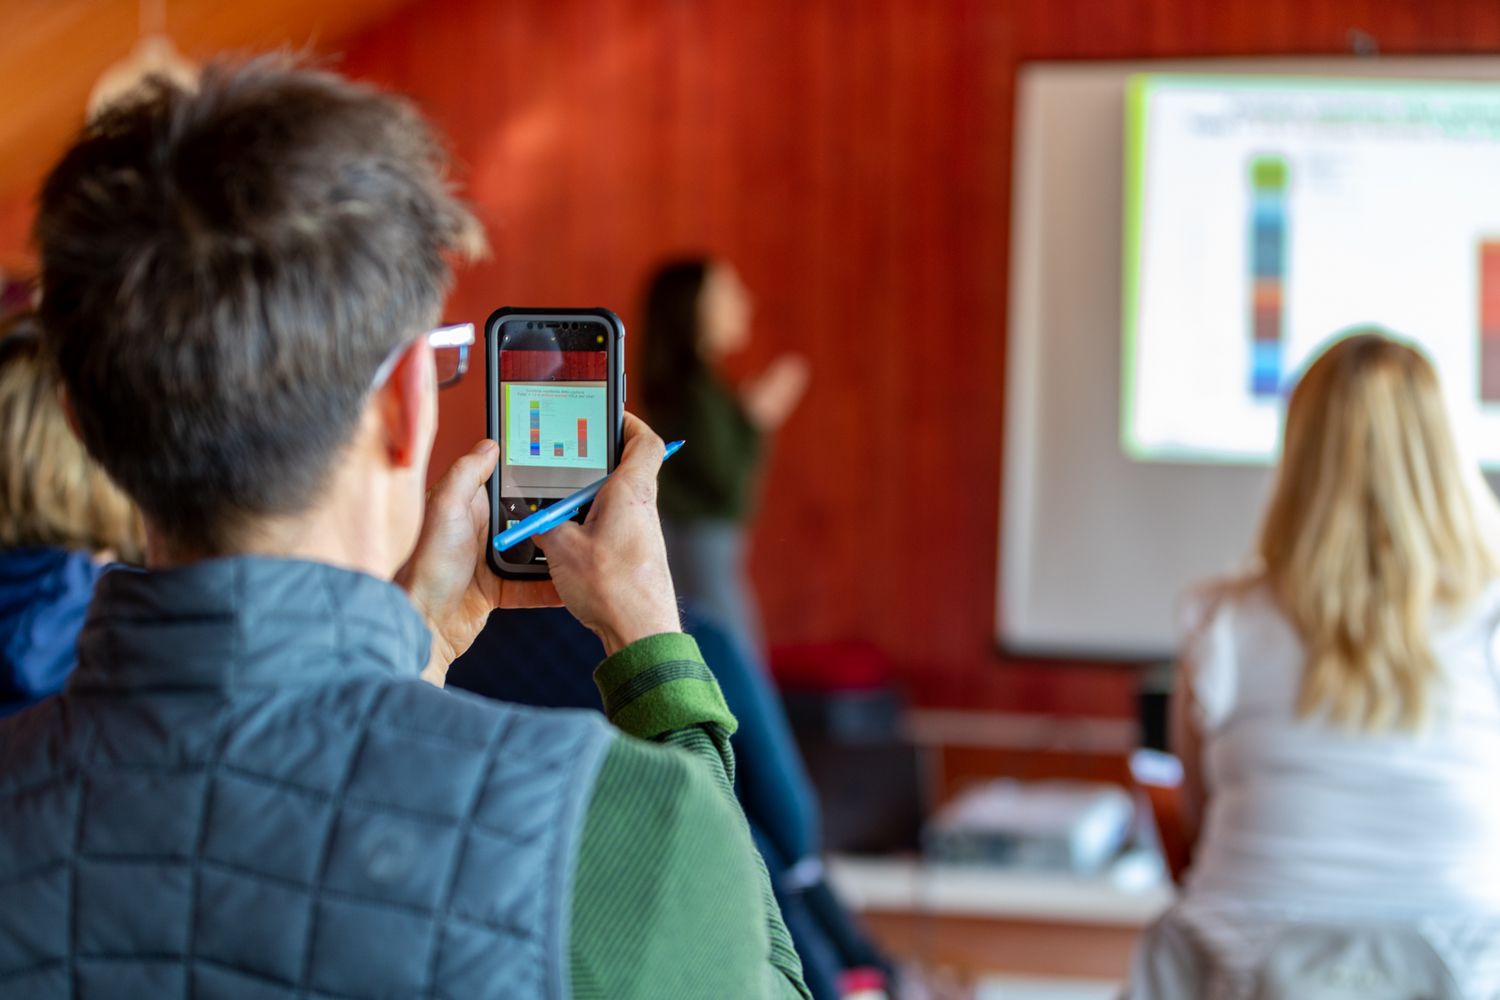 A man taking a picture of a presentation on his phone